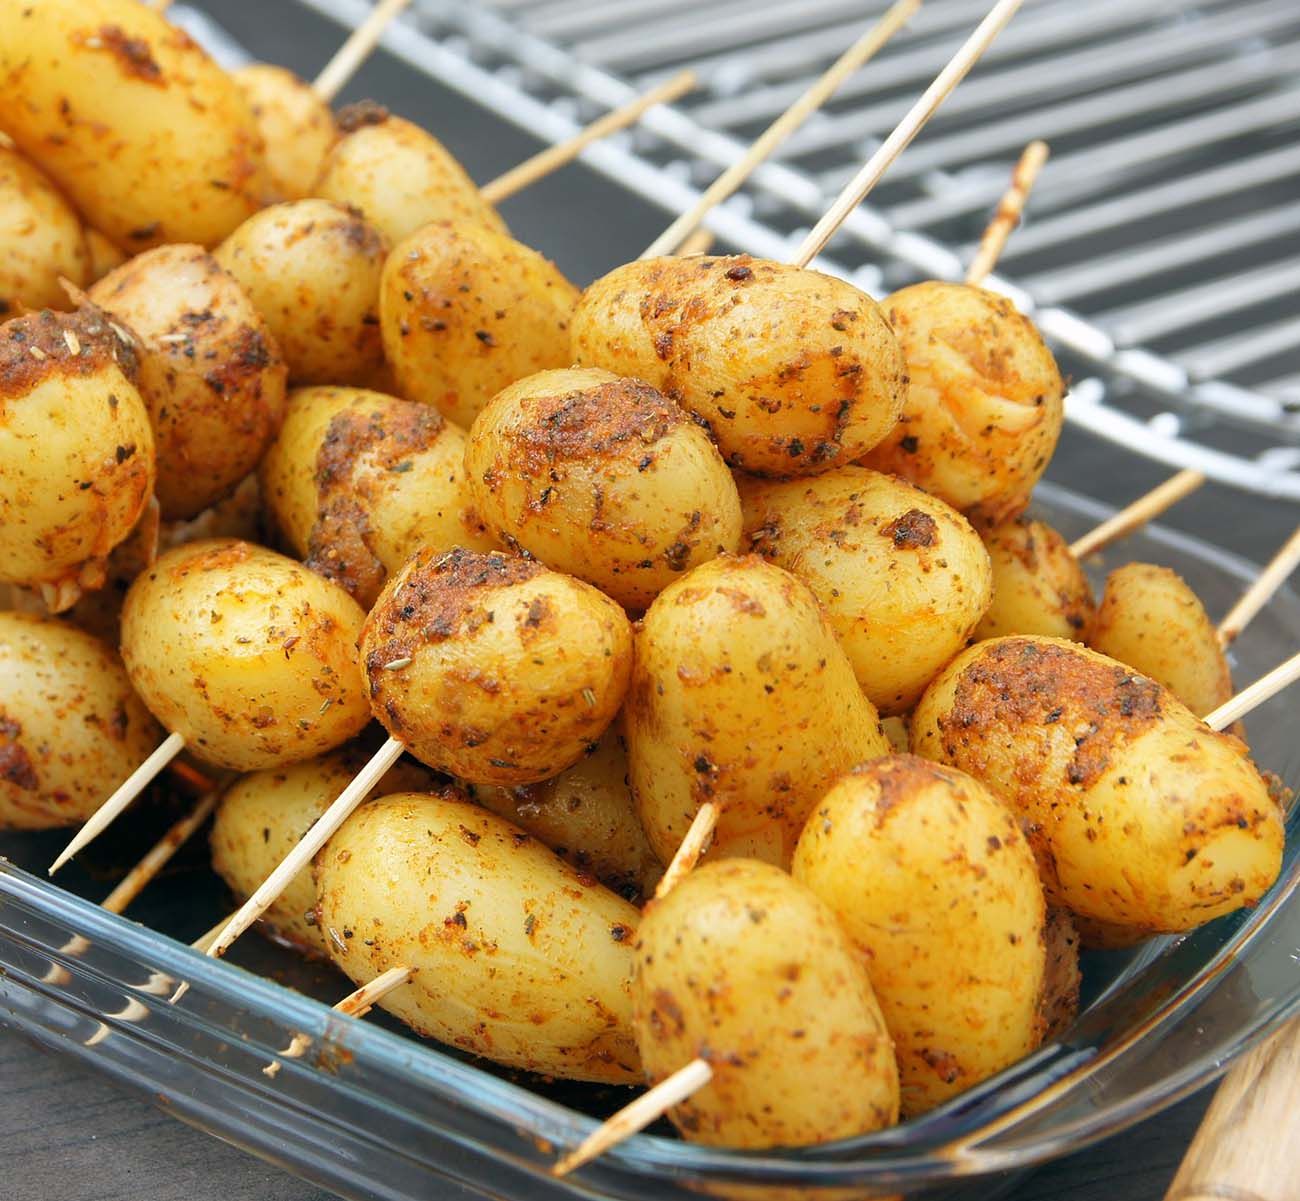 Oxford Glamping new potatoes on the grill